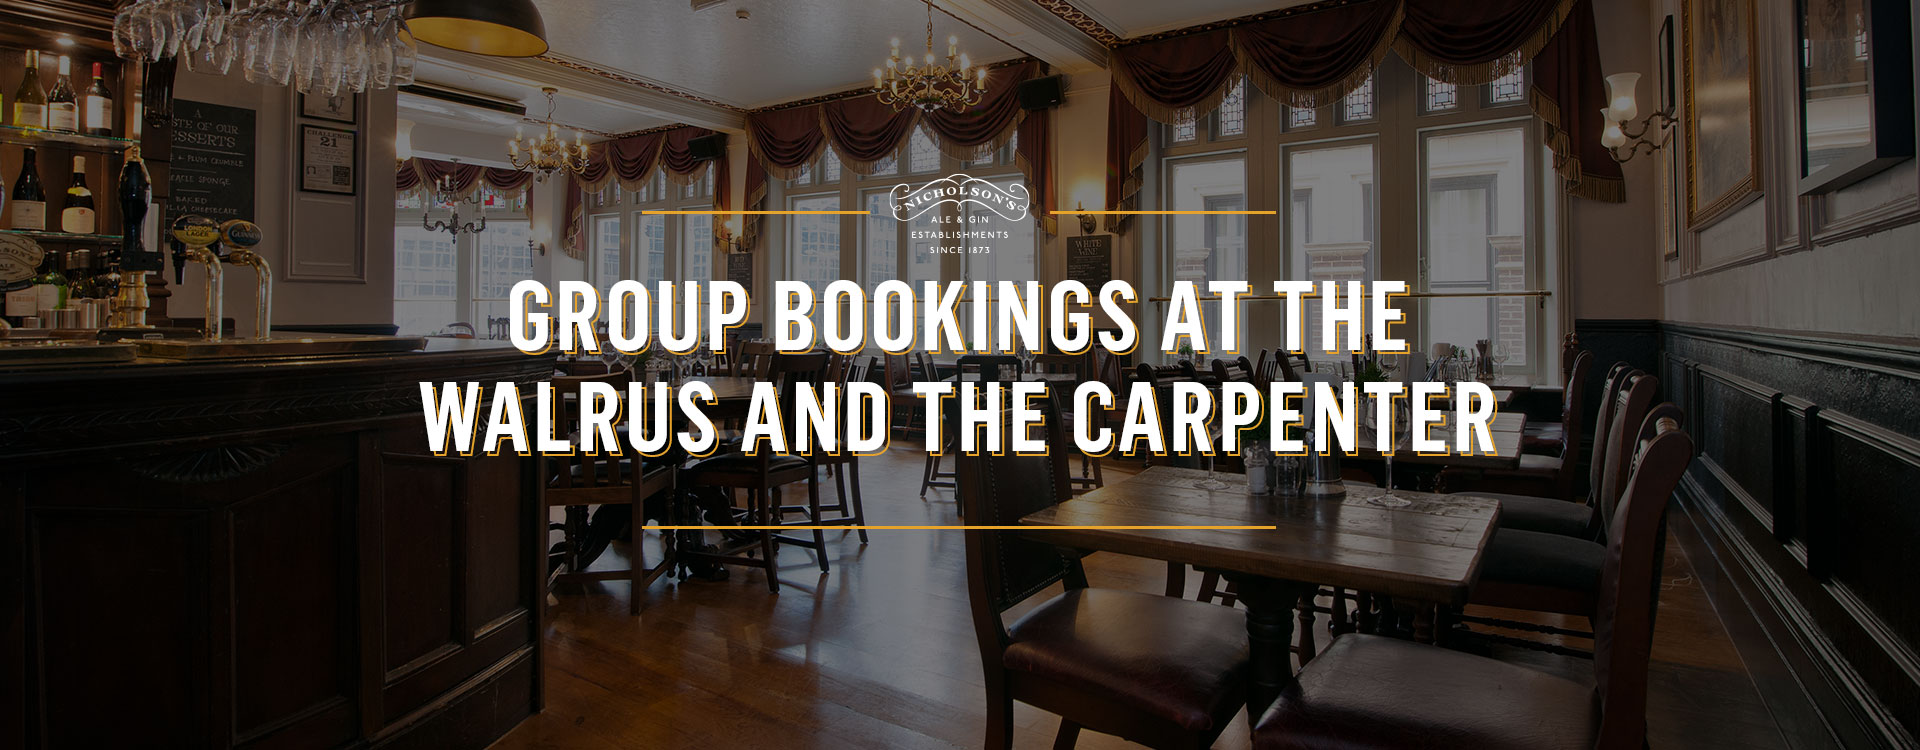 Group Bookings at The Walrus and The Carpenter